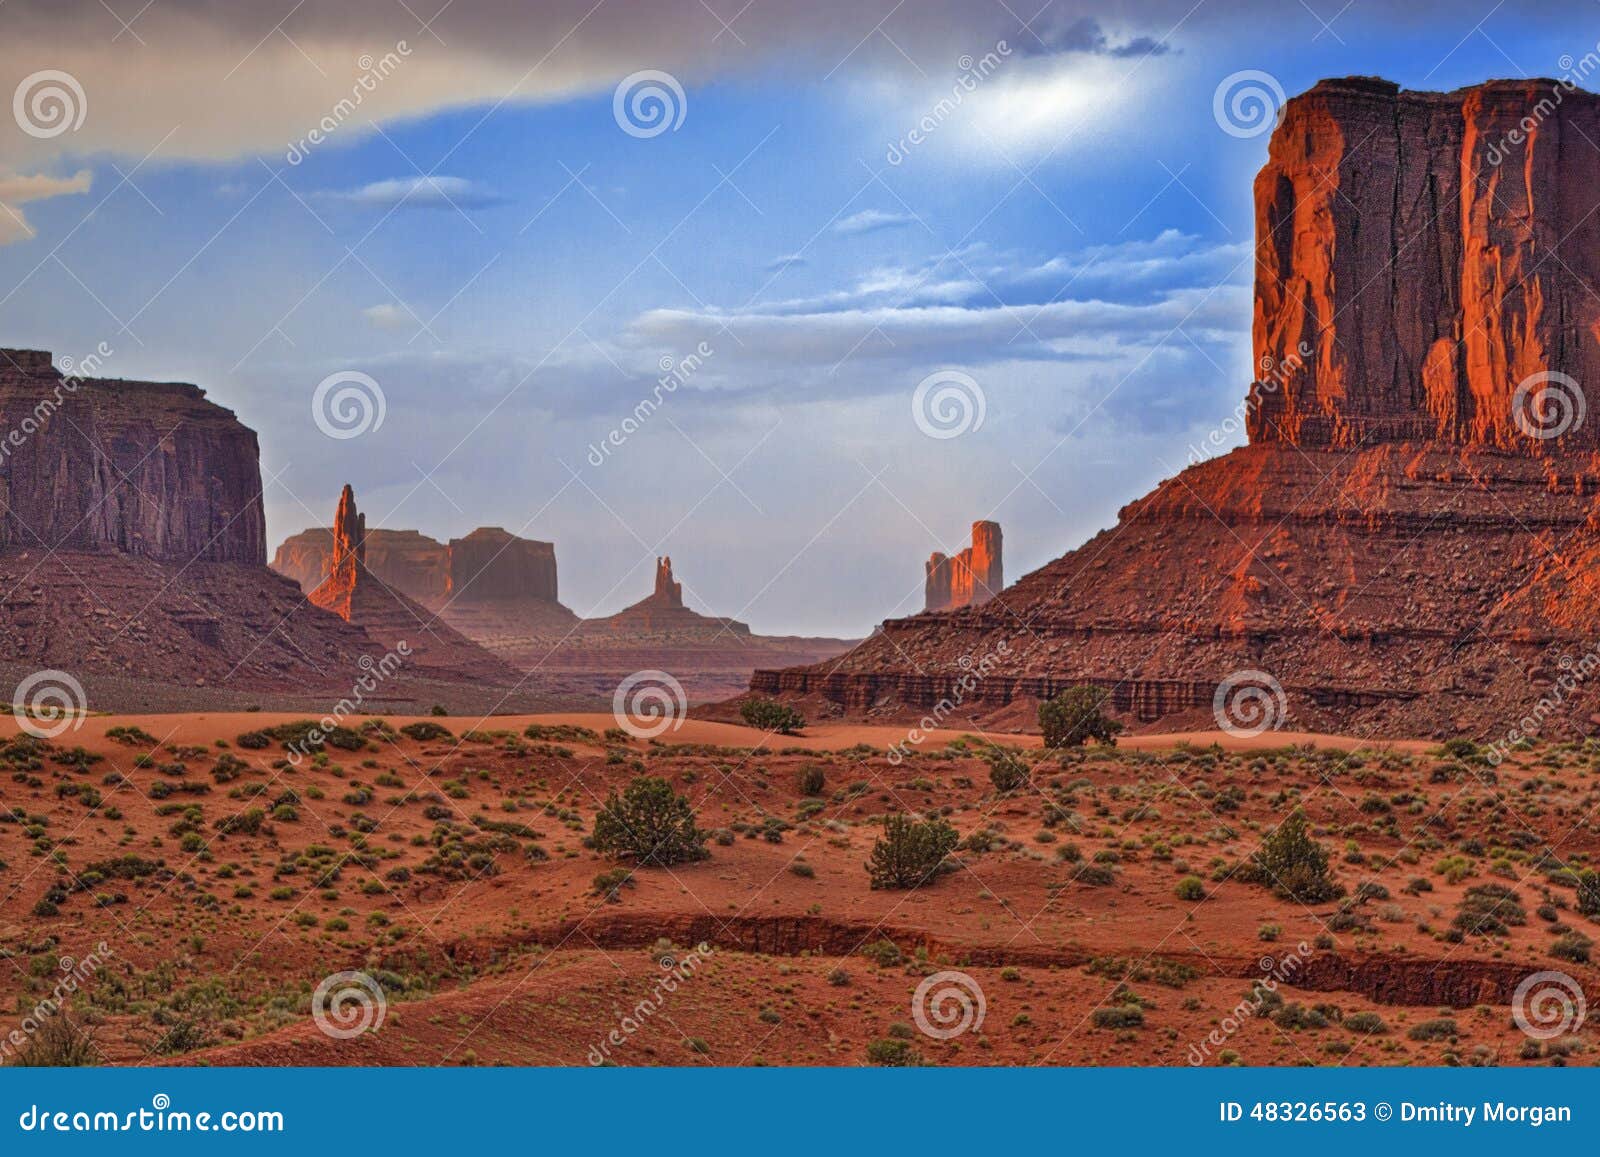 renowned buttes of monument valley in utah state, united states